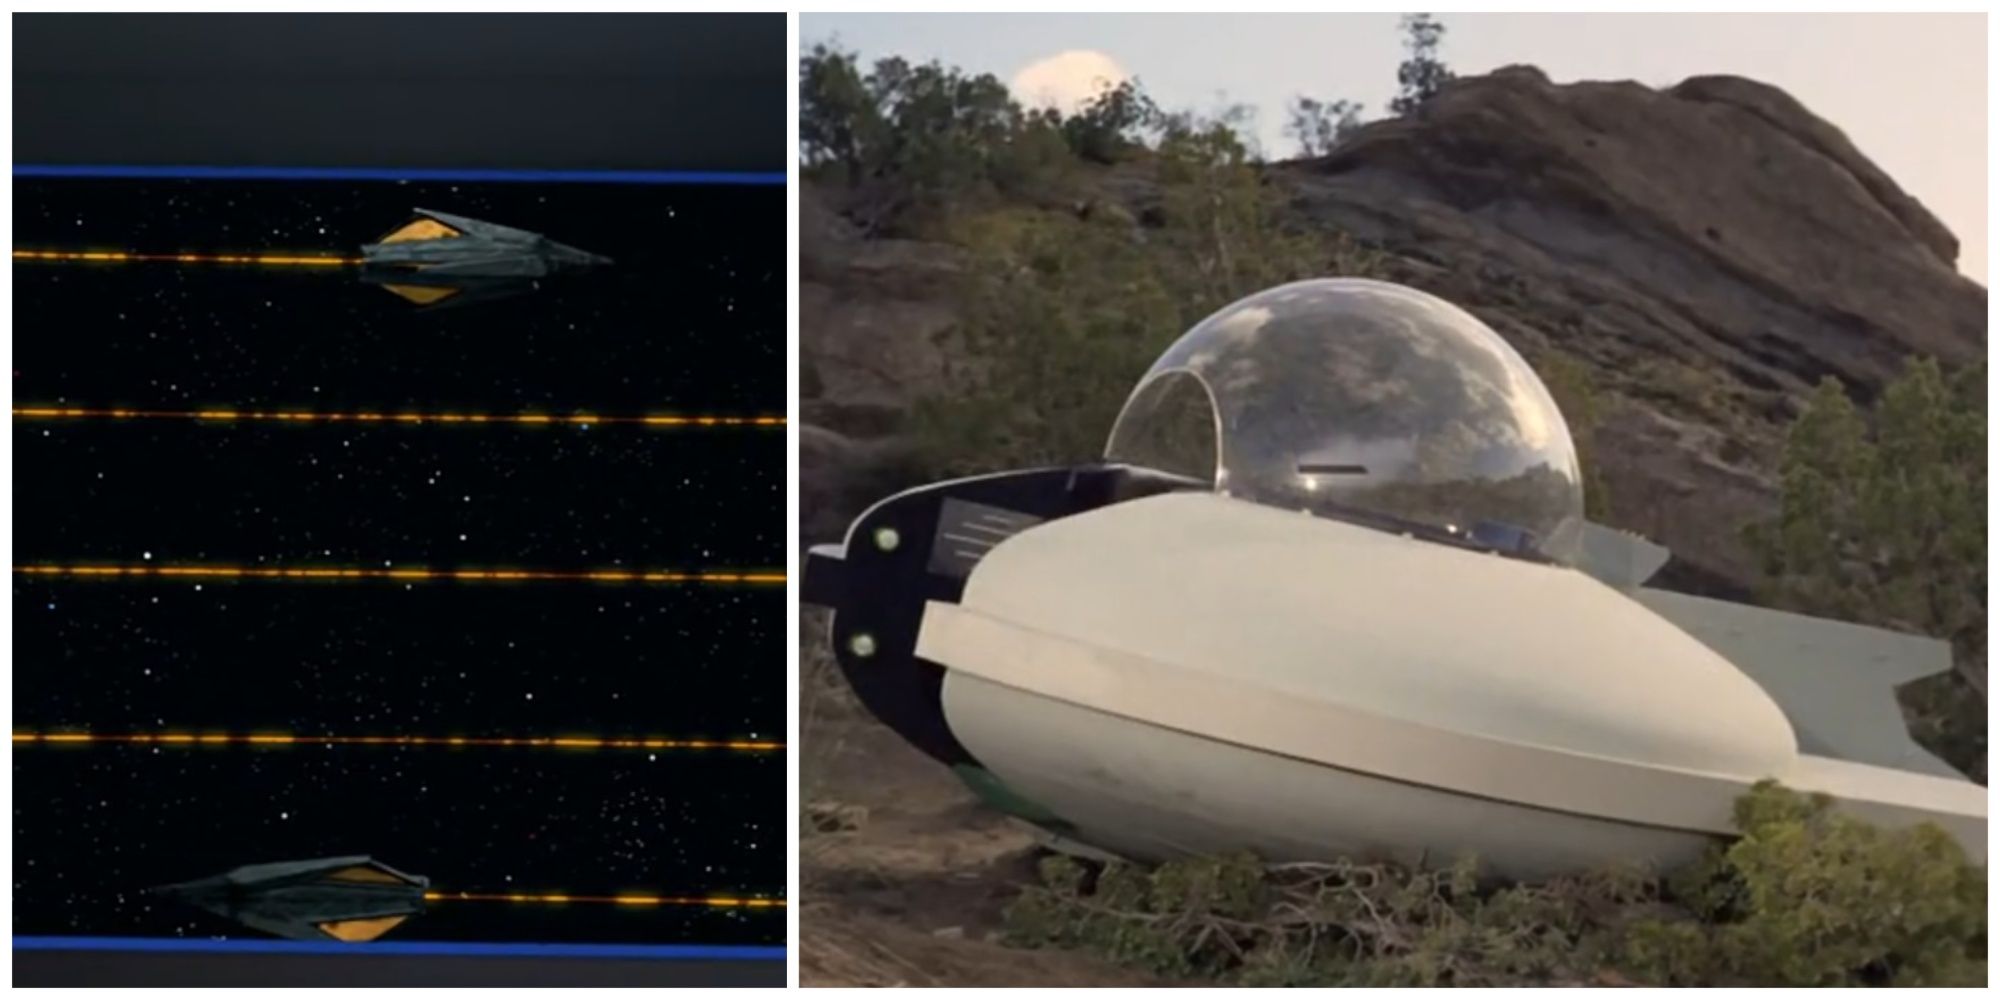 Split image showing starships from Star Trek: The Original Series (Tholian ships and Lazarus' ship).